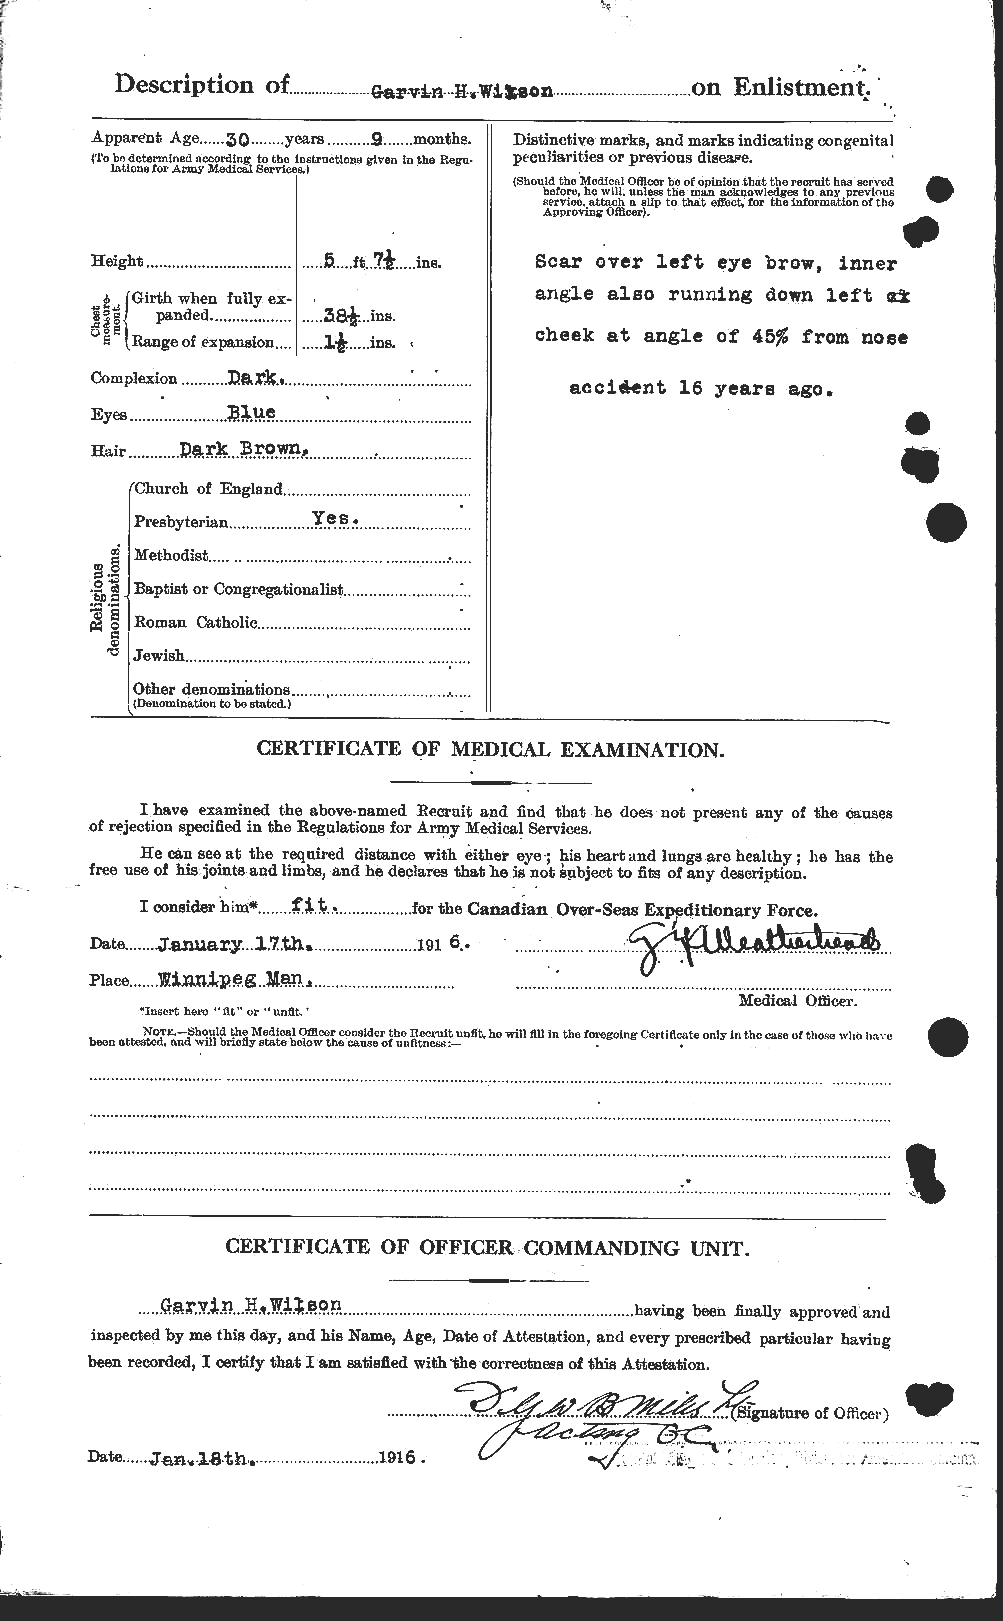 Personnel Records of the First World War - CEF 677618b